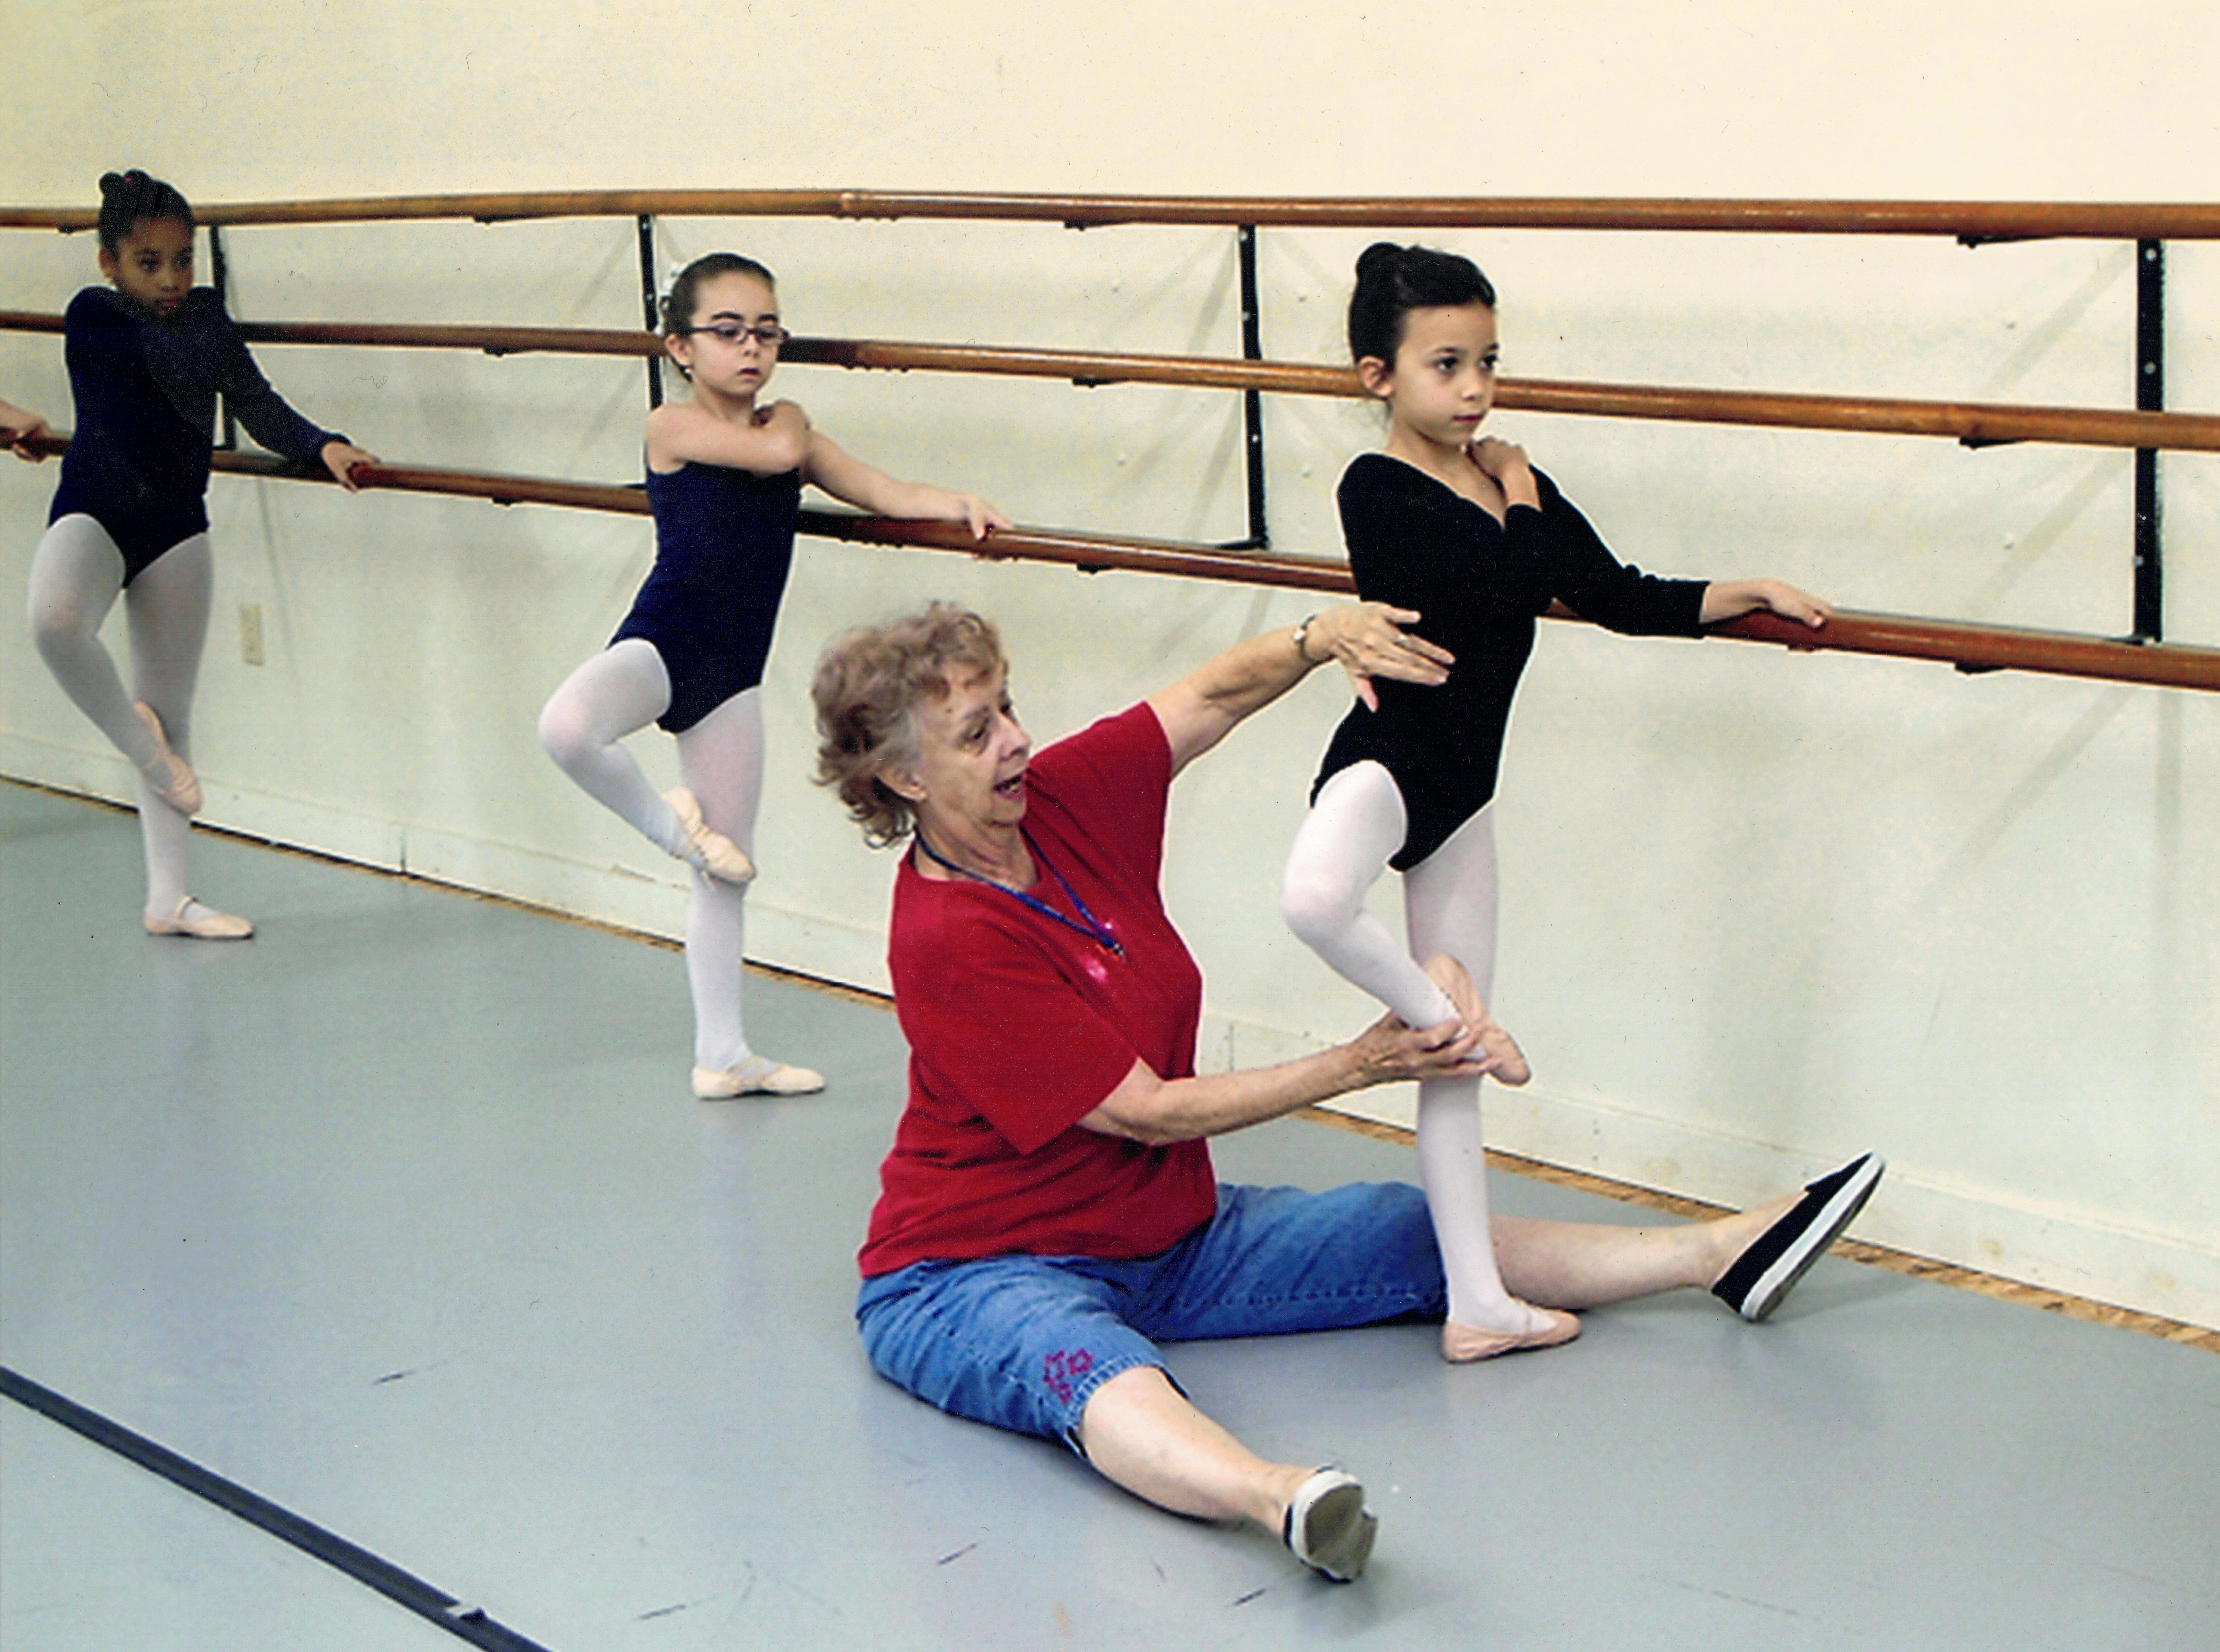 Image of dance educator Pat Sorrell instructing a student at the barre